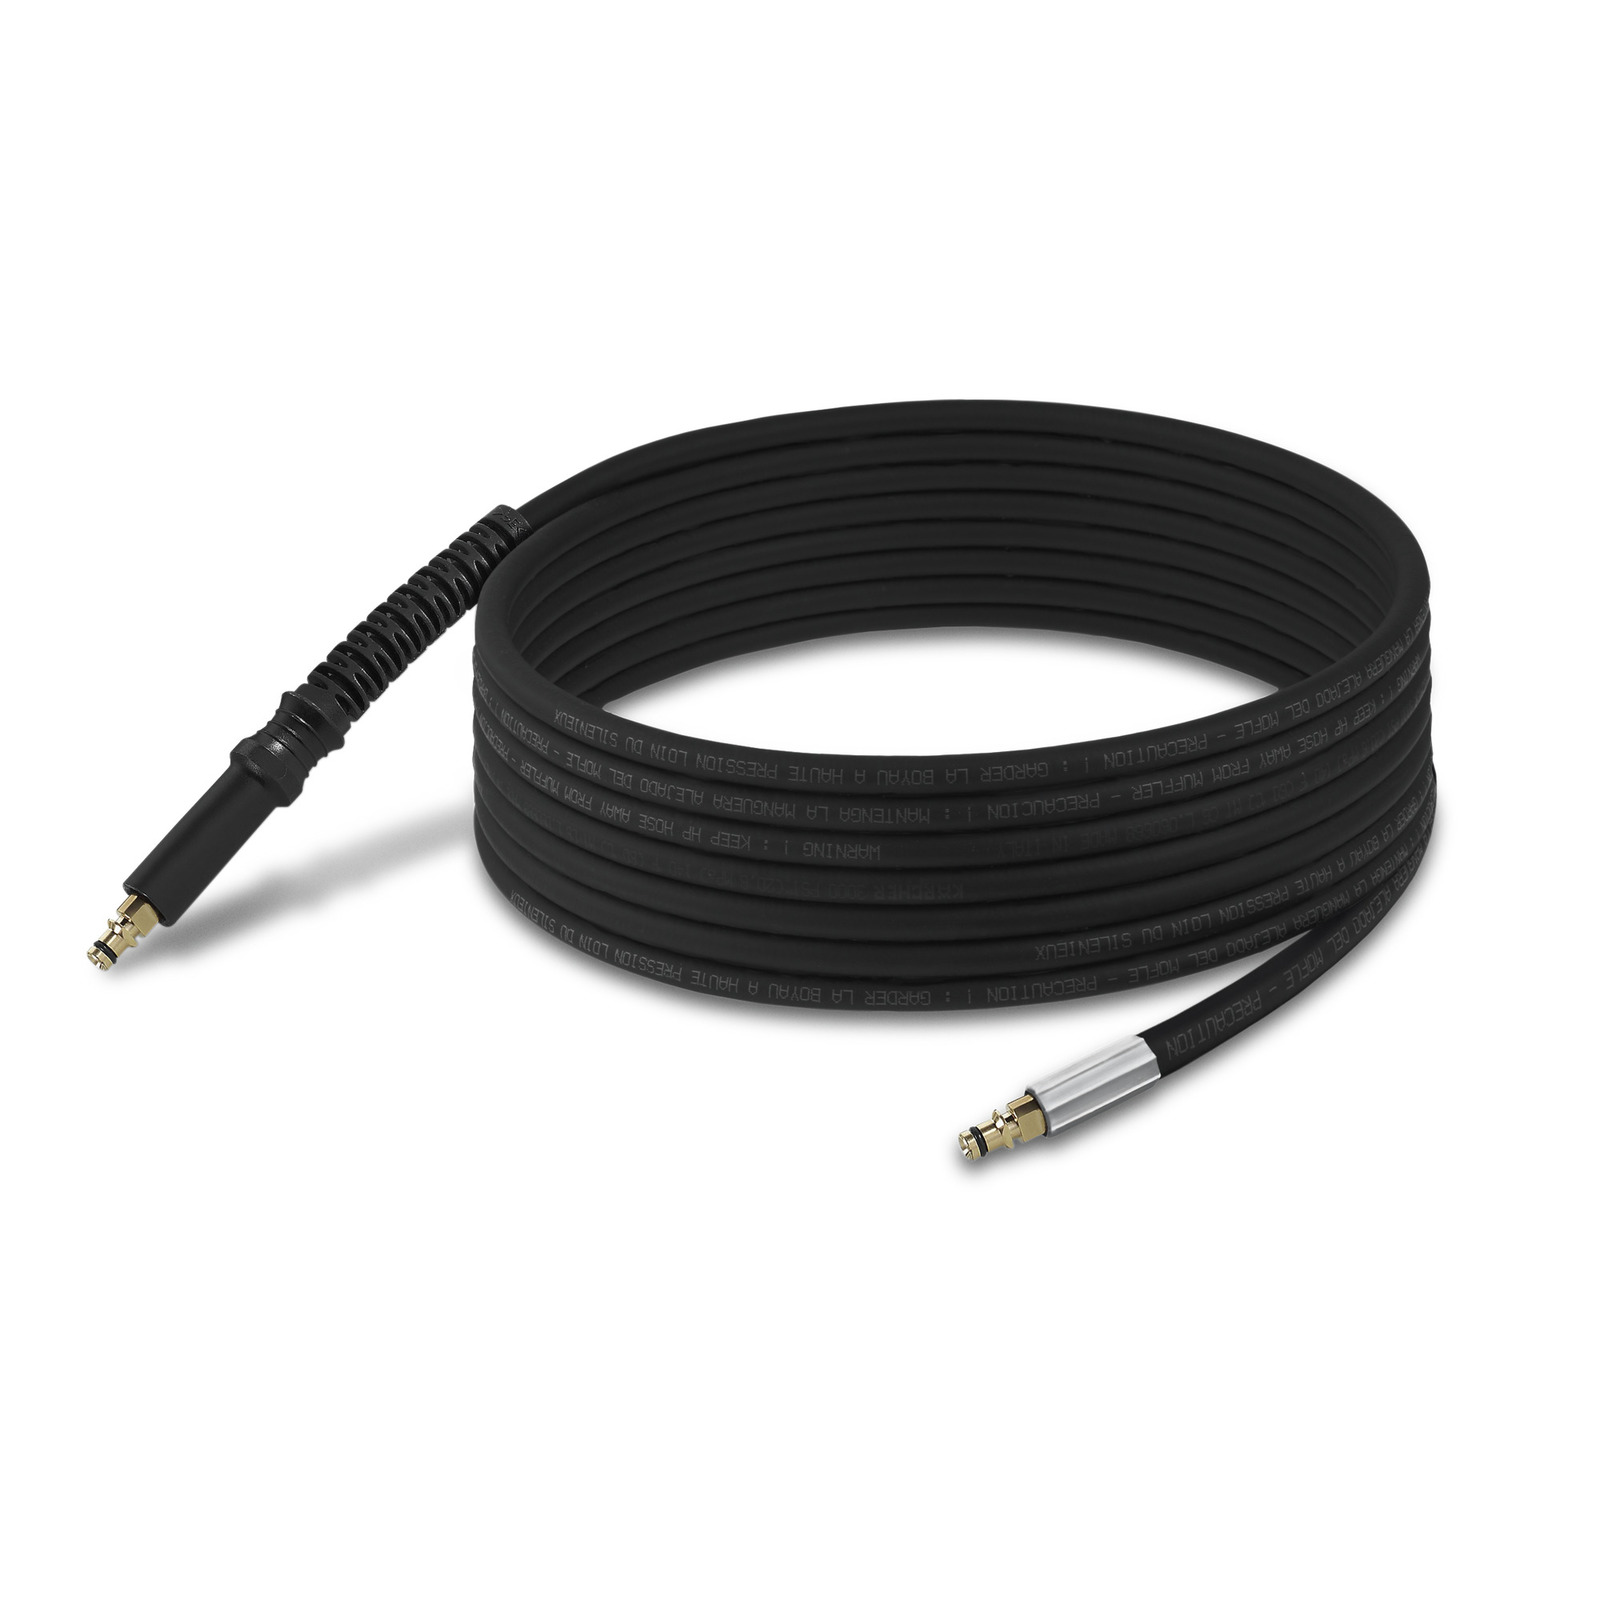 25 ft. Quick Connect High Pressure Hose, 2.642-583.0